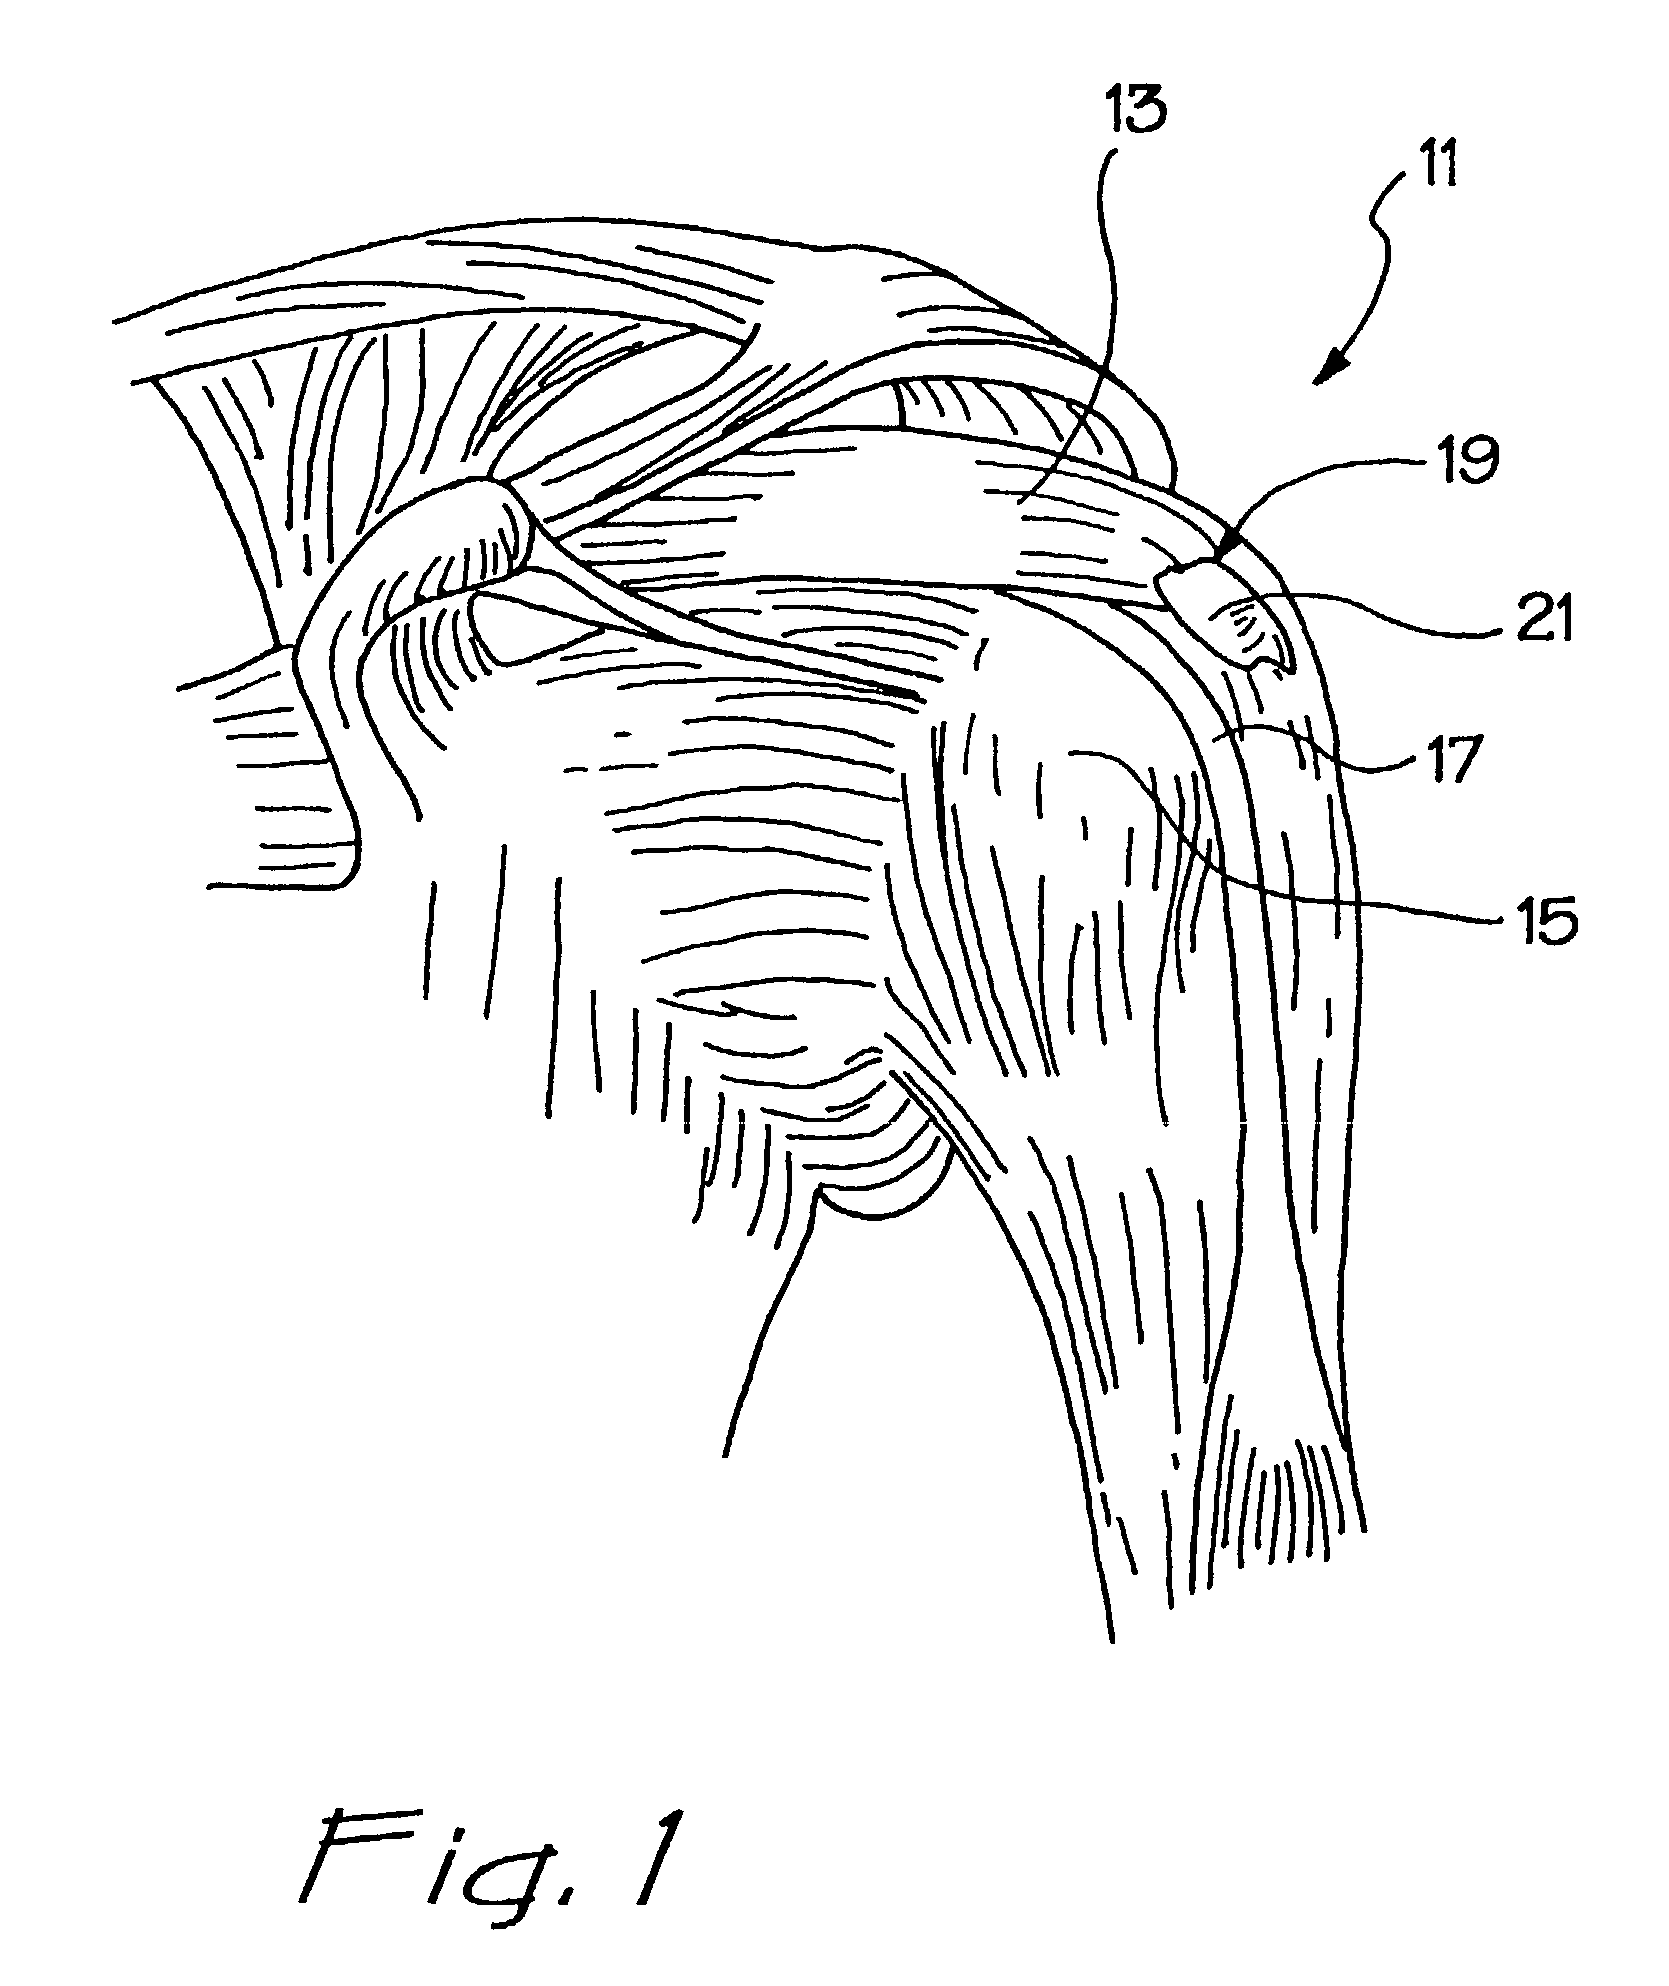 Linear suturing apparatus and methods